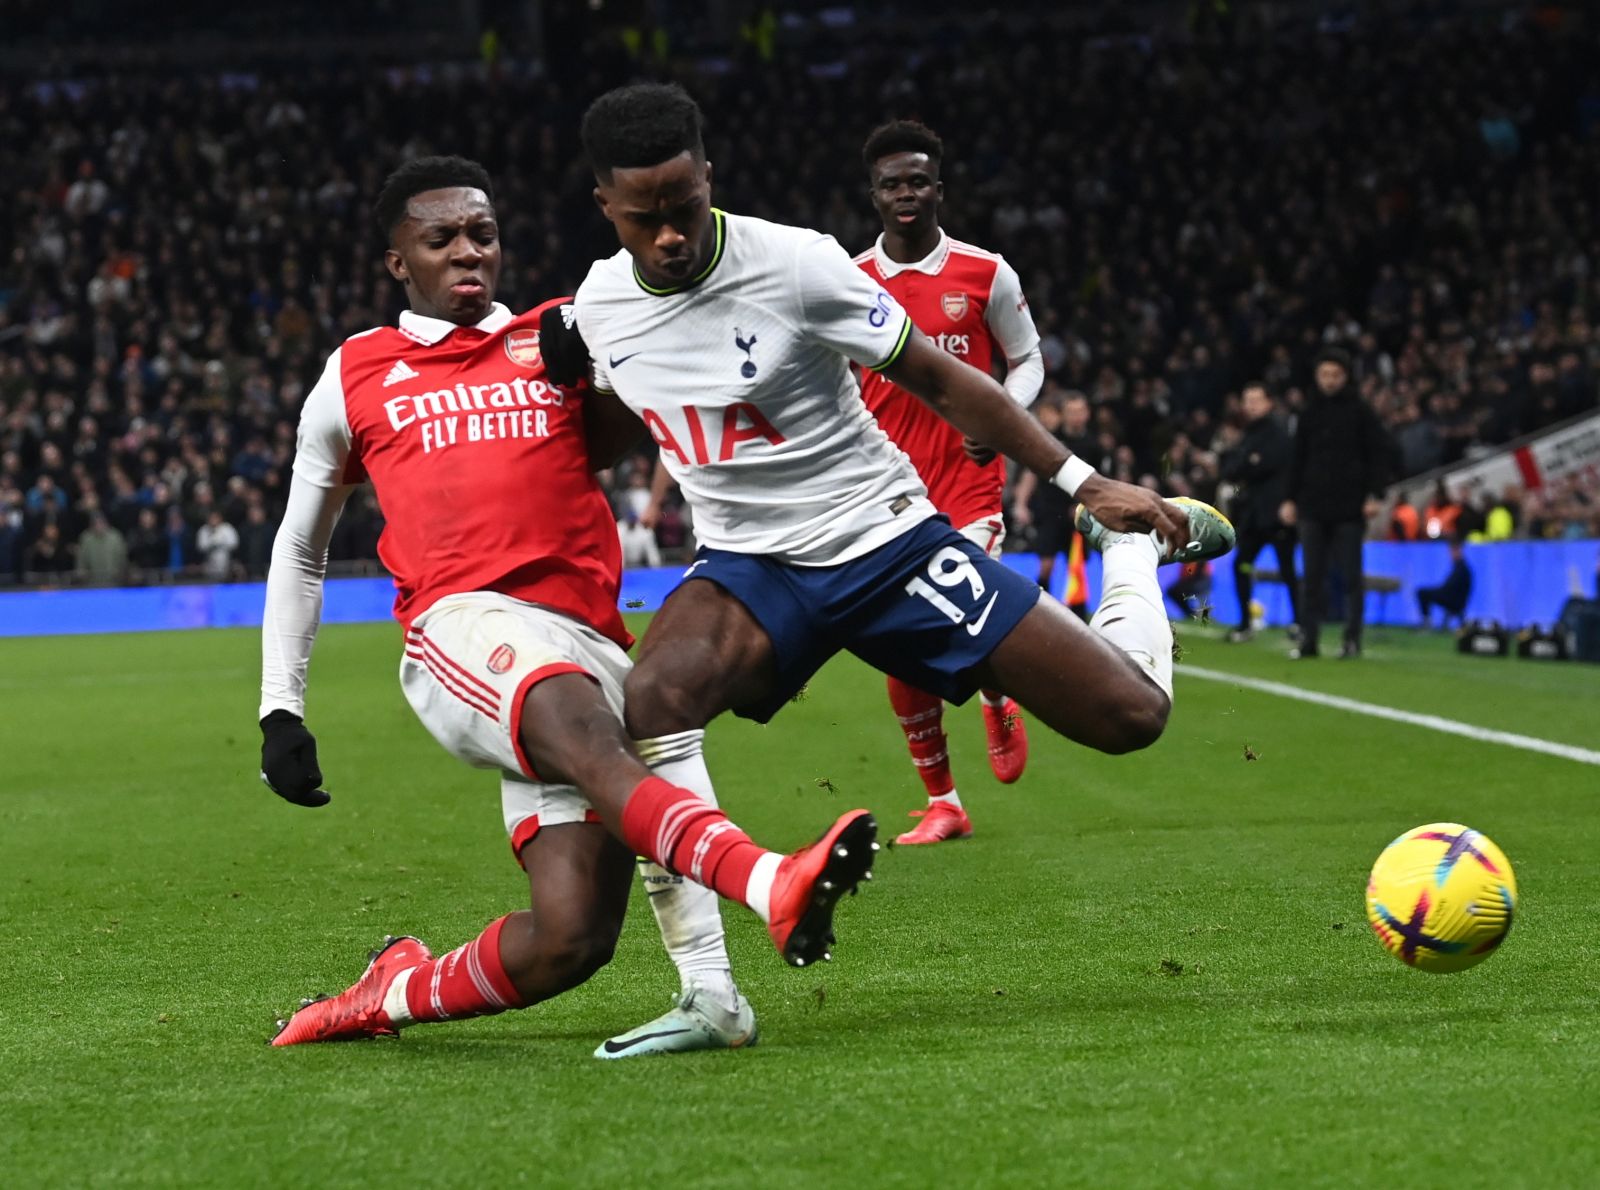 epa10407313 Ryan Sessegnon (R) of Tottenham in action against Eddie Nketiah of Arsenal during the English Premier League soccer match between Tottenham Hotspur and Arsenal London in London, Britain, 15 January 2023.  EPA/Neil Hall EDITORIAL USE ONLY. No use with unauthorized audio, video, data, fixture lists, club/league logos or 'live' services. Online in-match use limited to 120 images, no video emulation. No use in betting, games or single club/league/player publications